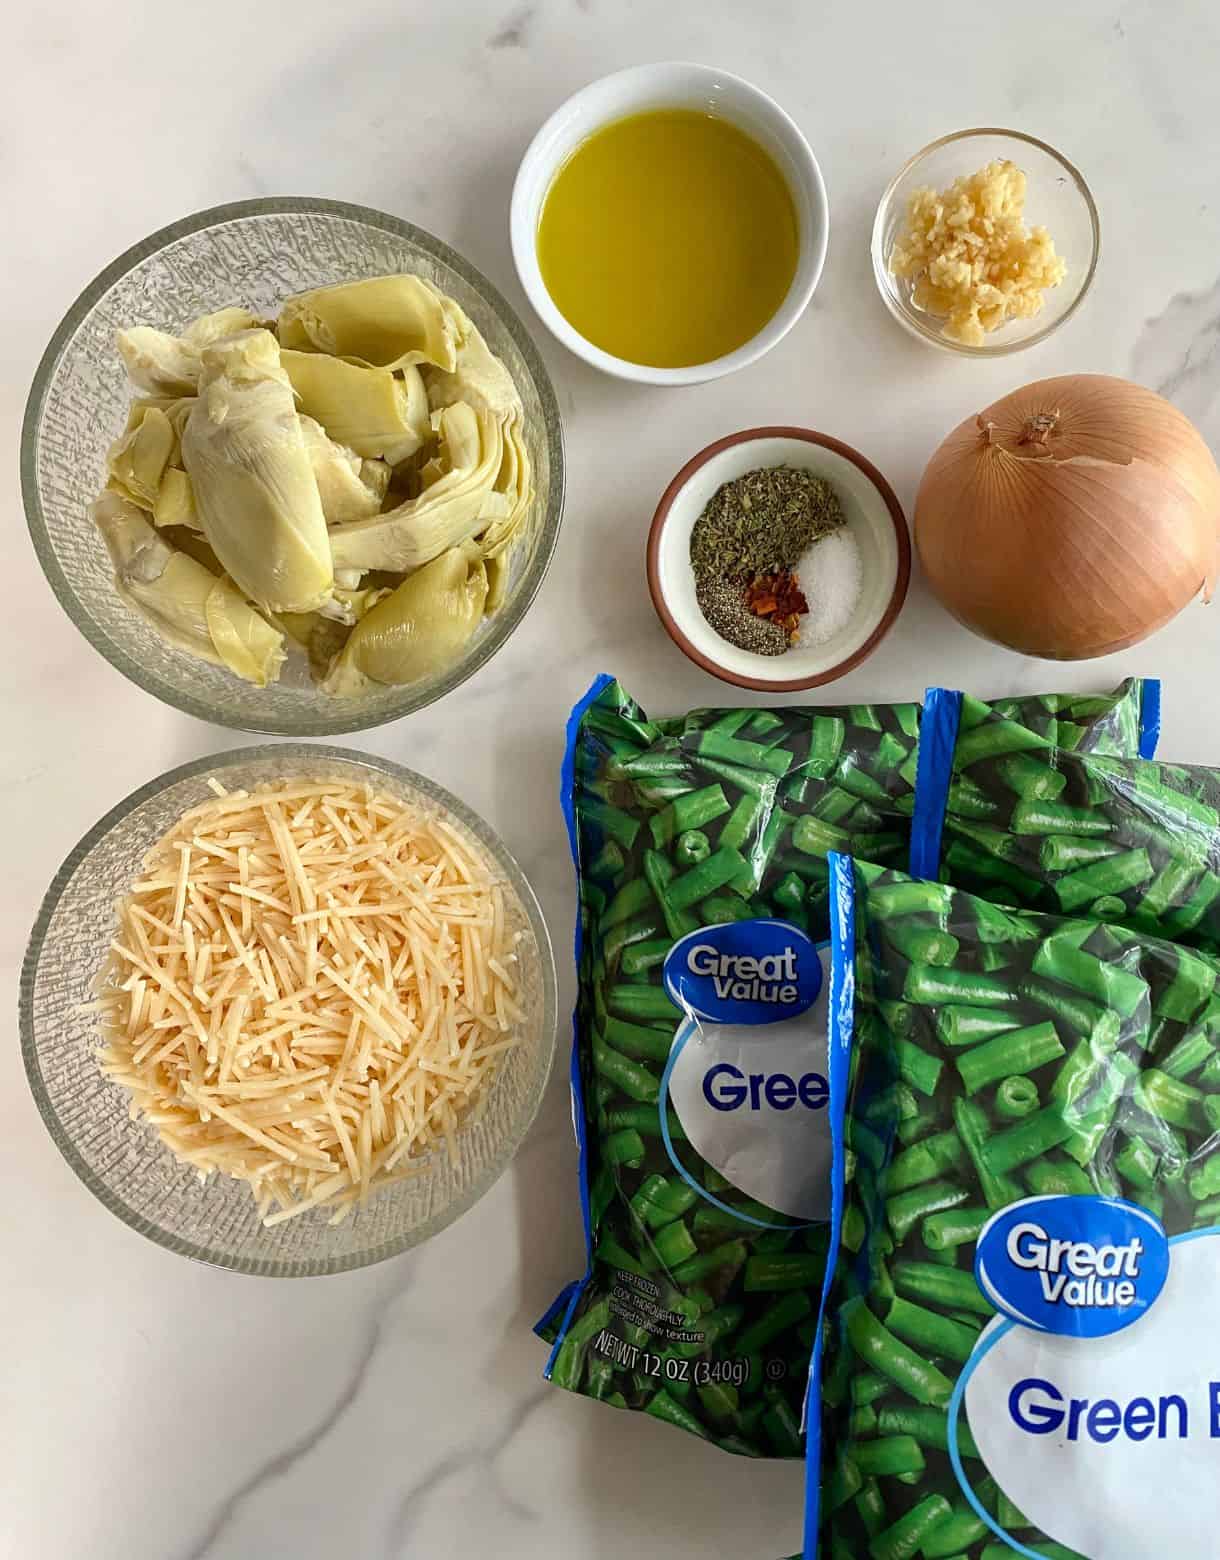 3 bags of frozen green beans, shredded parmesan cheese, artichoke hearts, olive oil, an onion, minced garlic, salt, pepper, red pepper flakes and Italian seasoning.